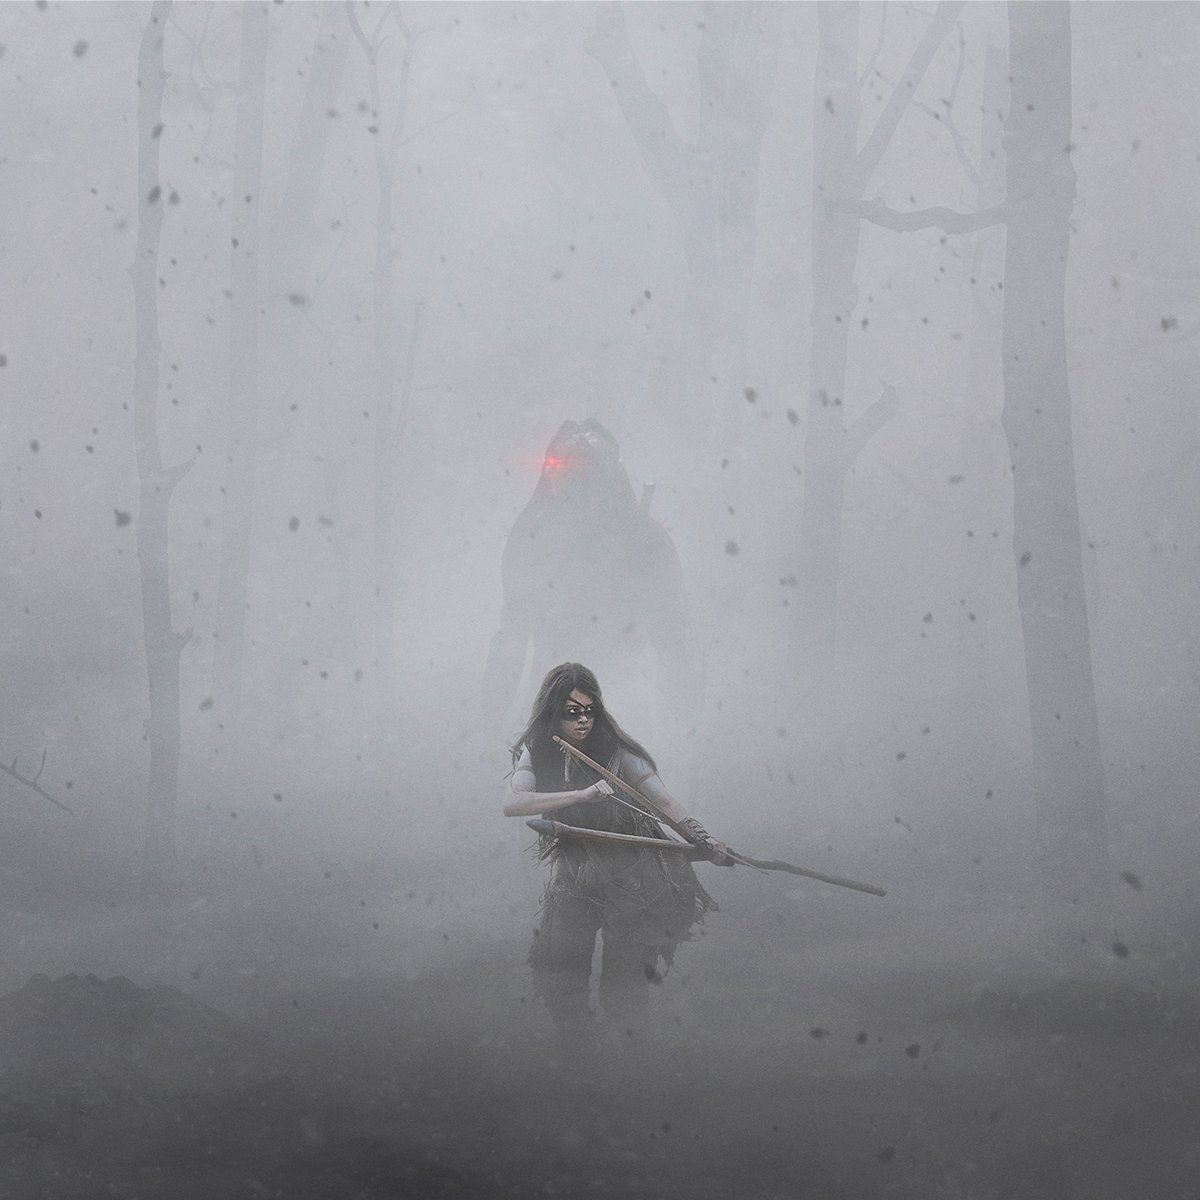 A woman walking through the woods while the Predator follows her in the movie Prey